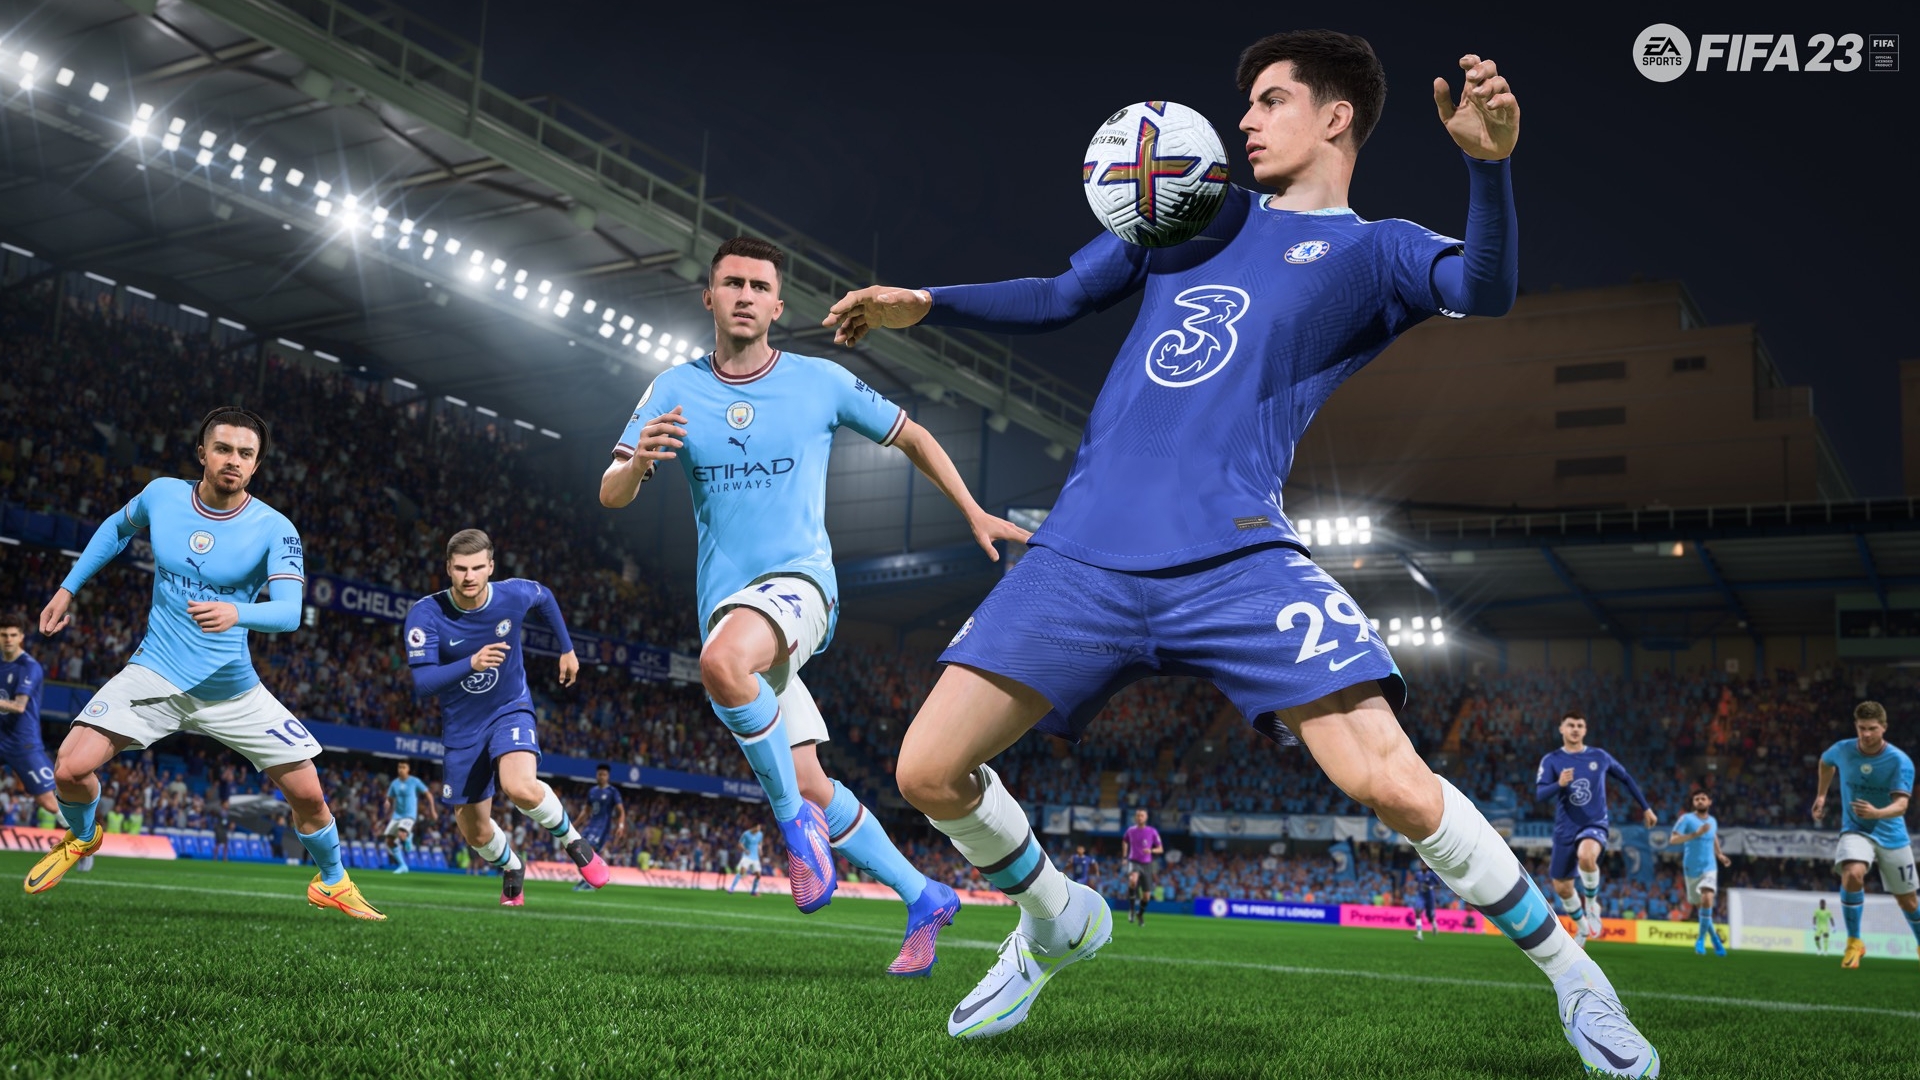 How to power shot FIFA 23?